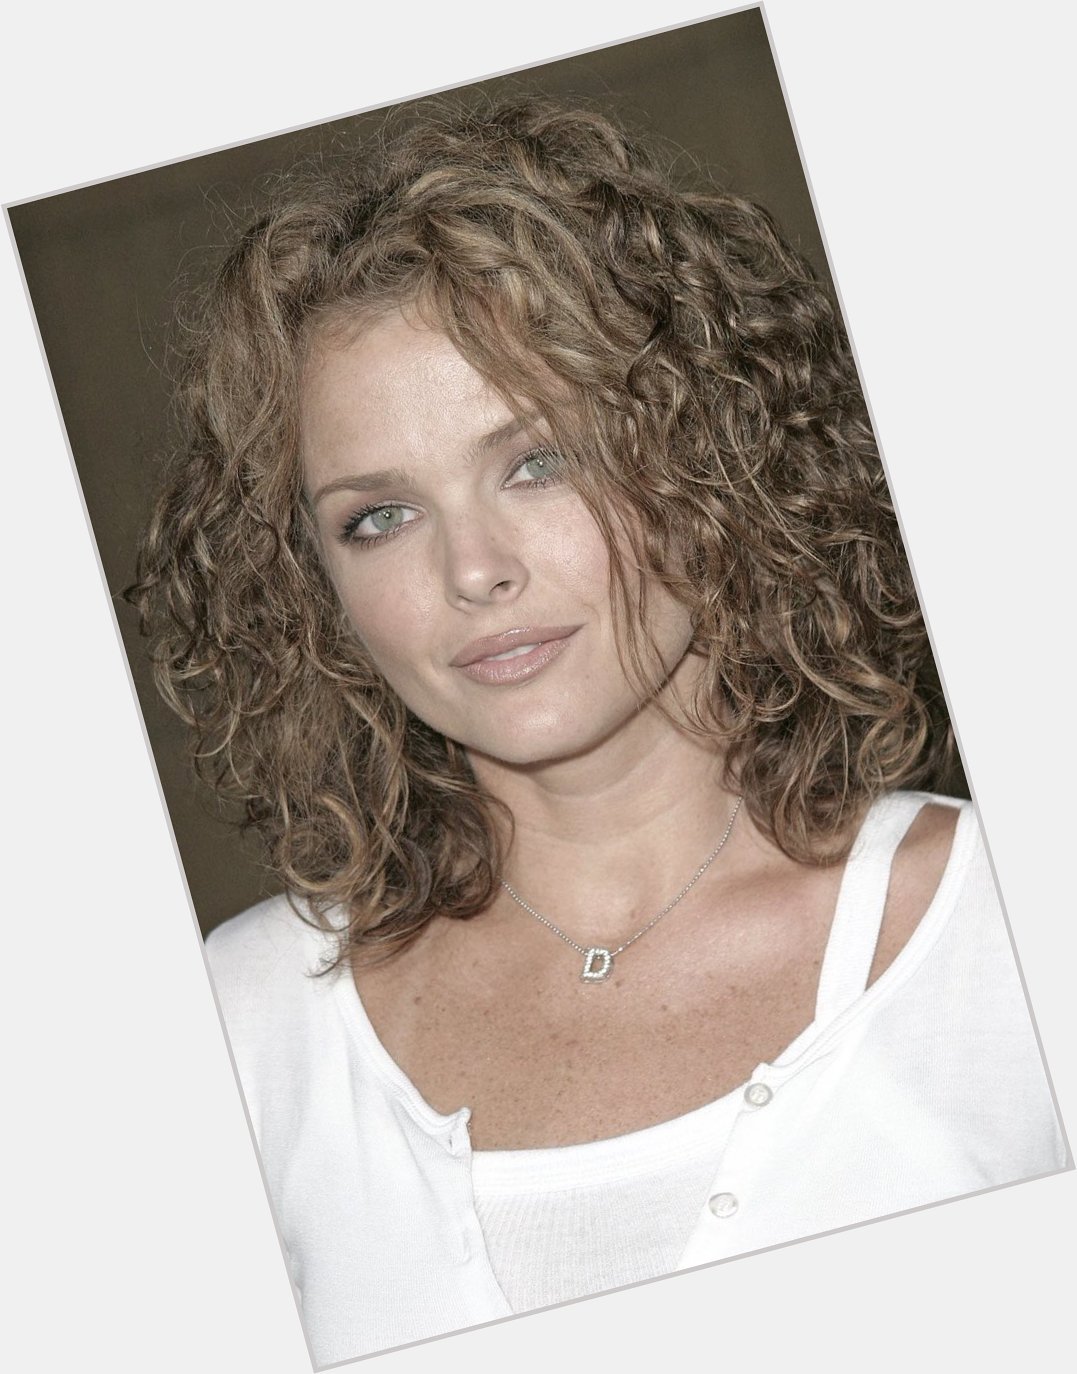    We wish a very happy birthday to the talented and gorgeous Dina Meyer! ¡Feliz cumpleaños 